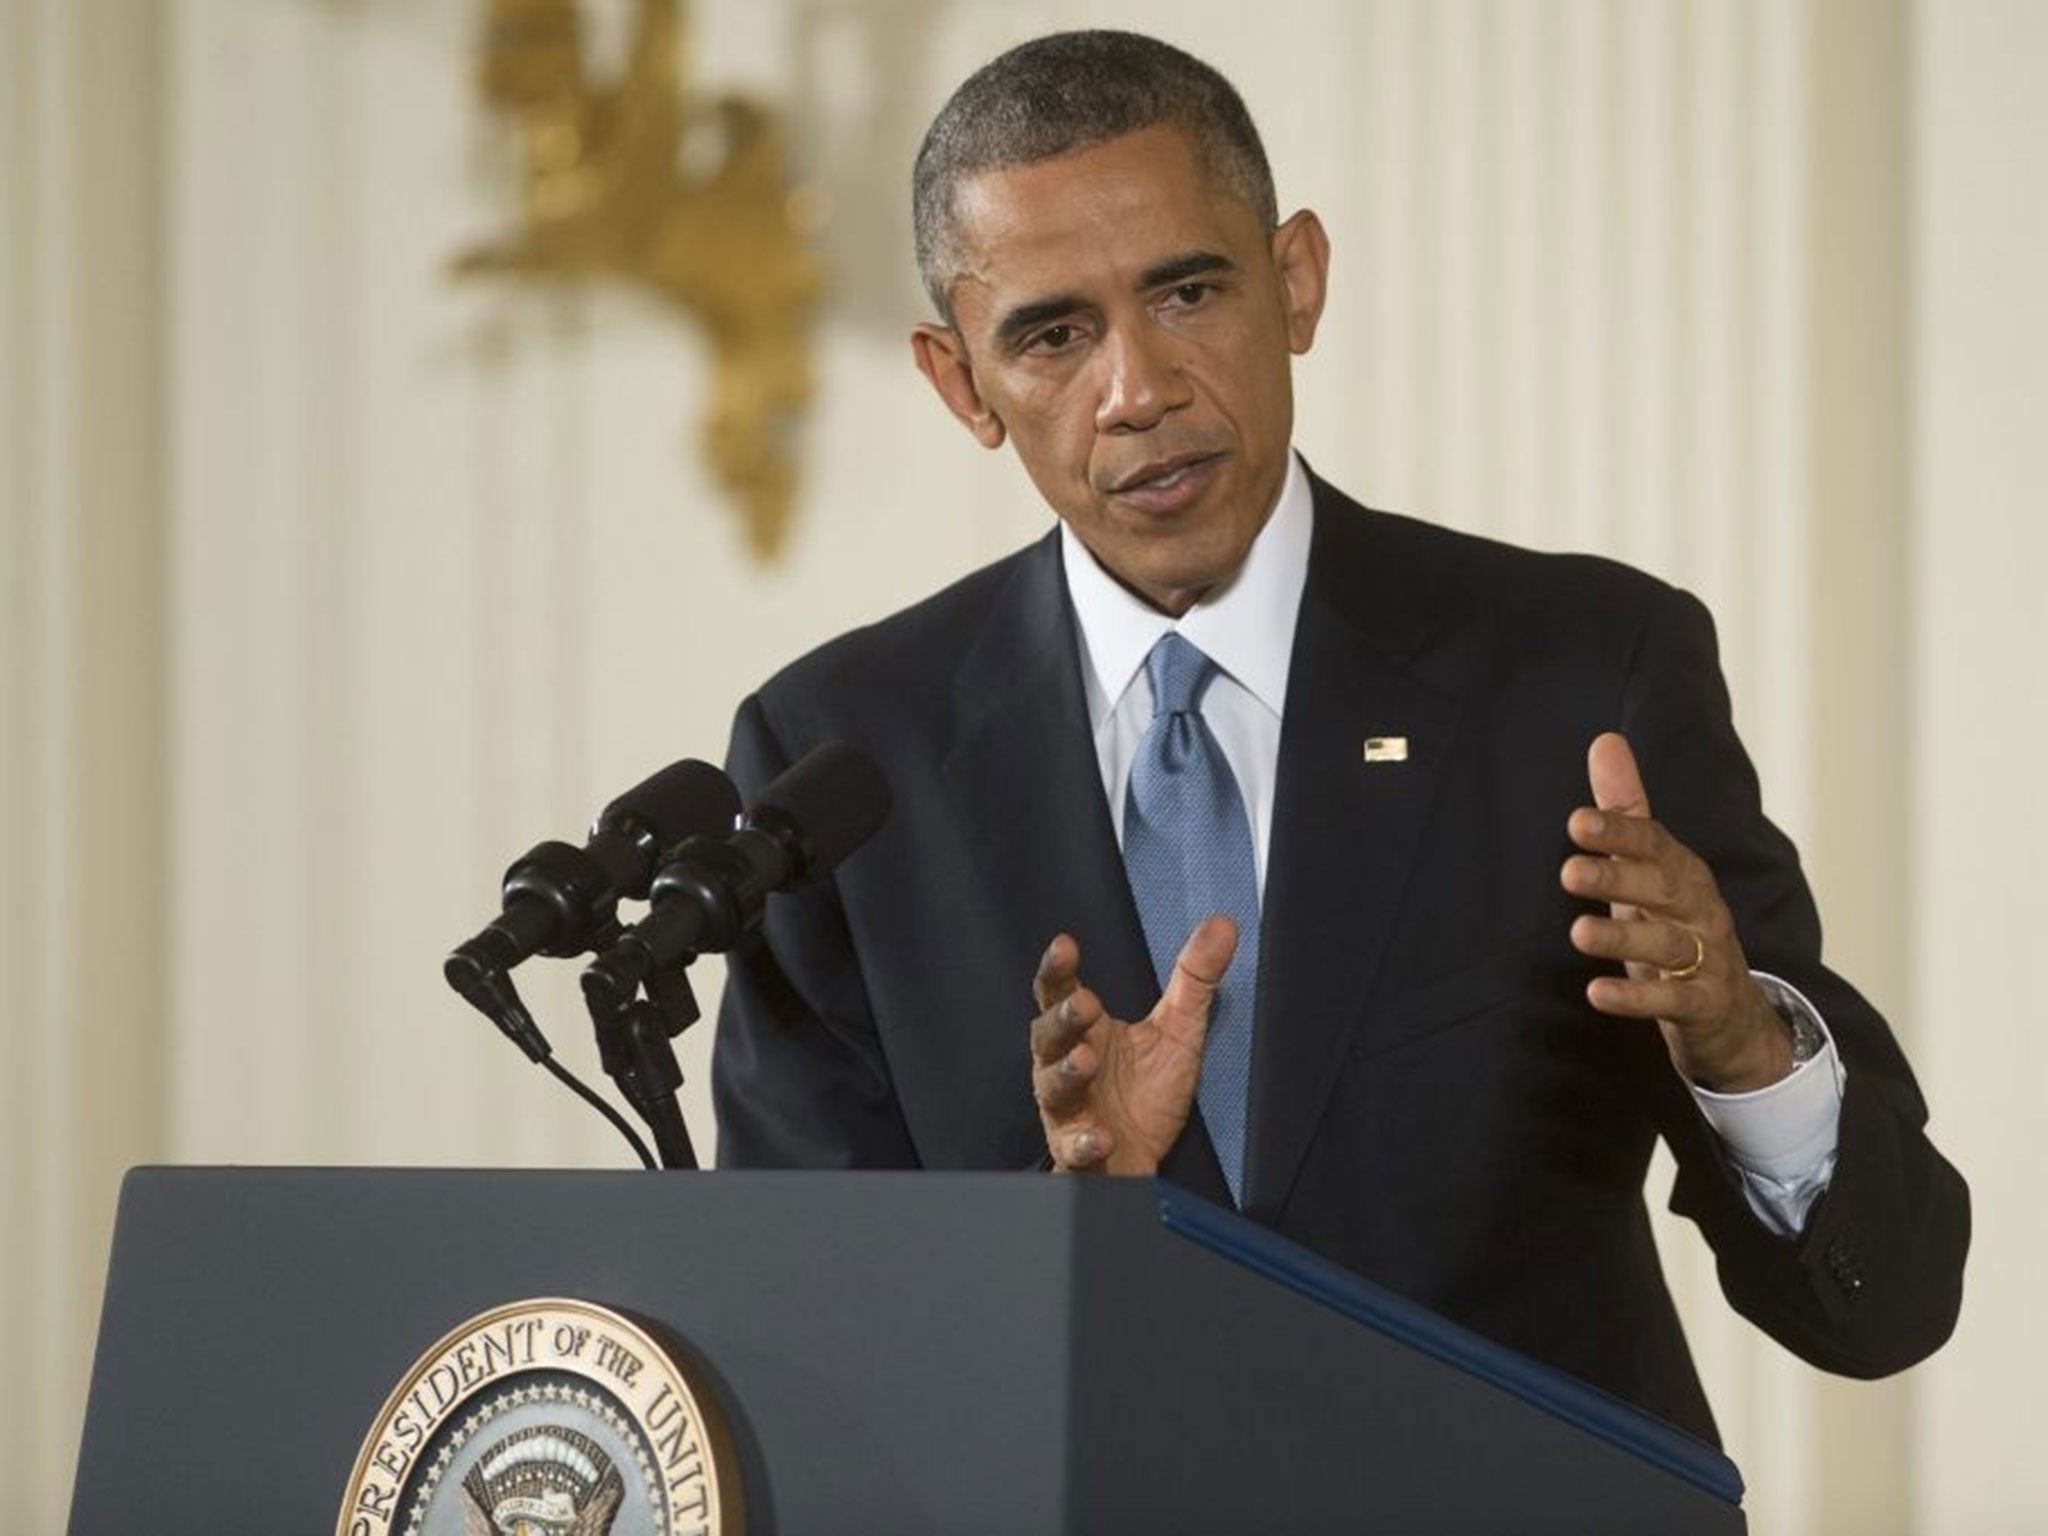 US President Barack Obama has pledged to work with Republicans